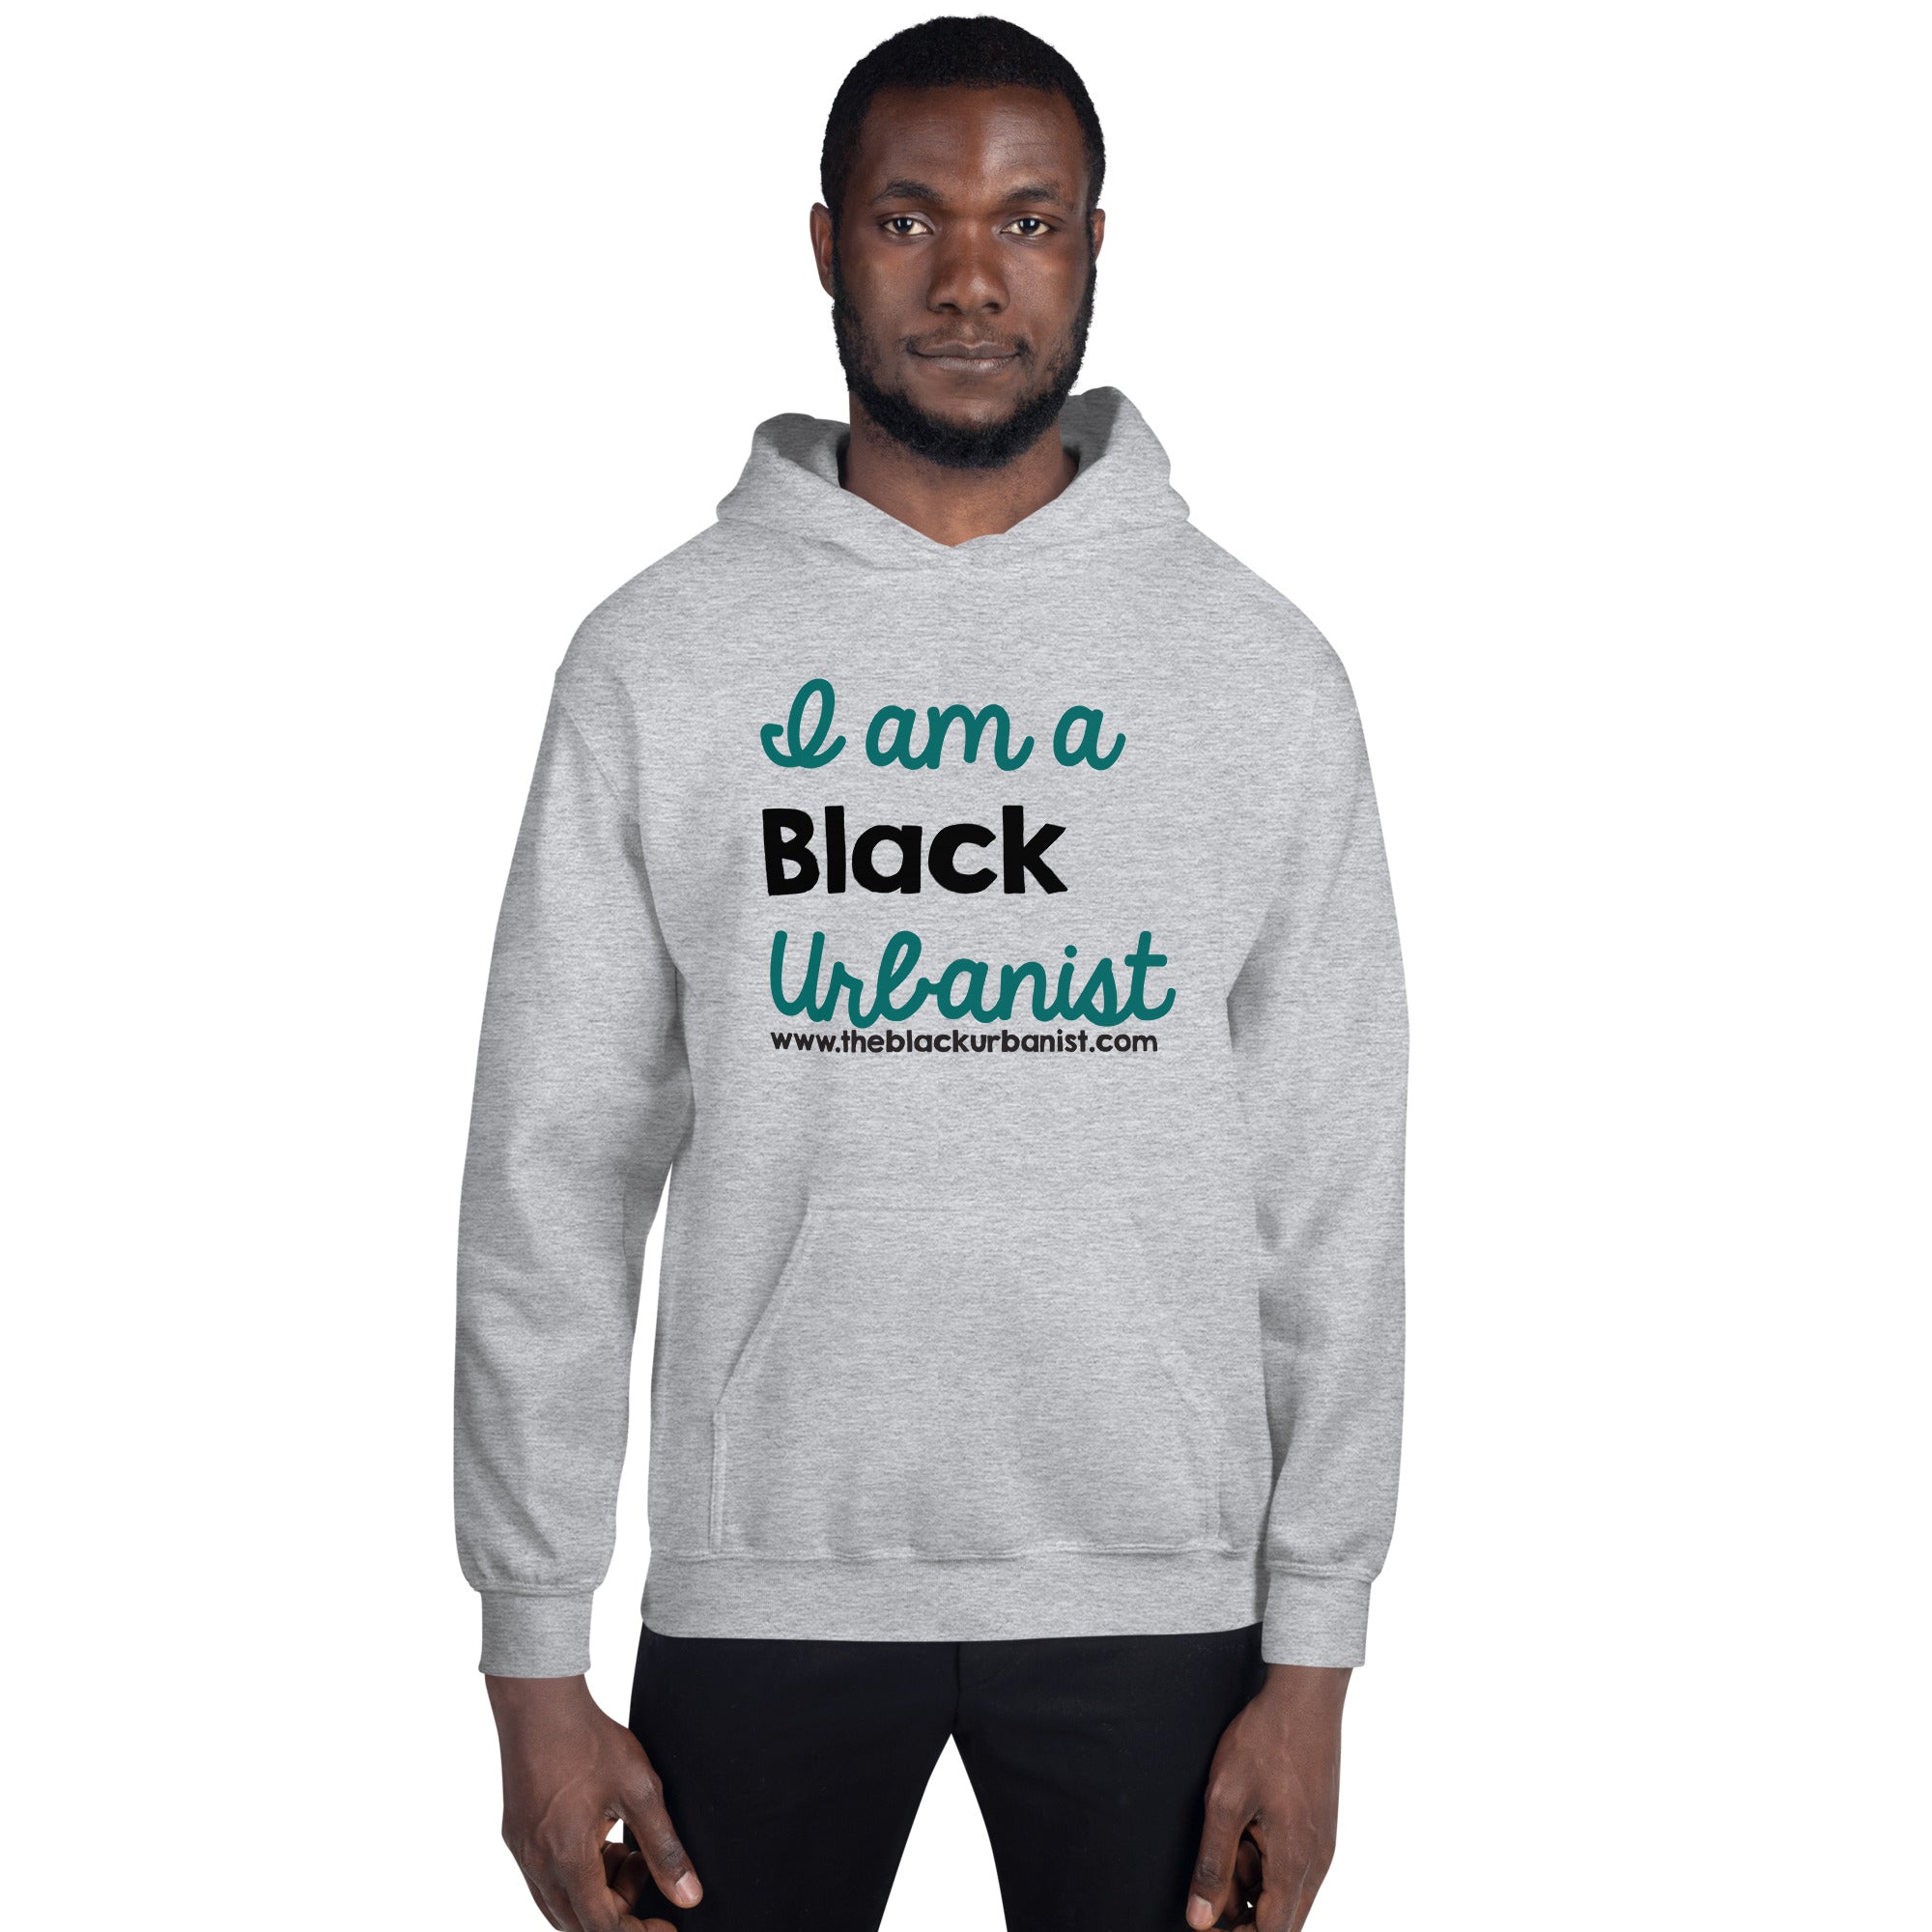 Black man wearing a grey hoodie with I am A Black Urbanist printed on the front